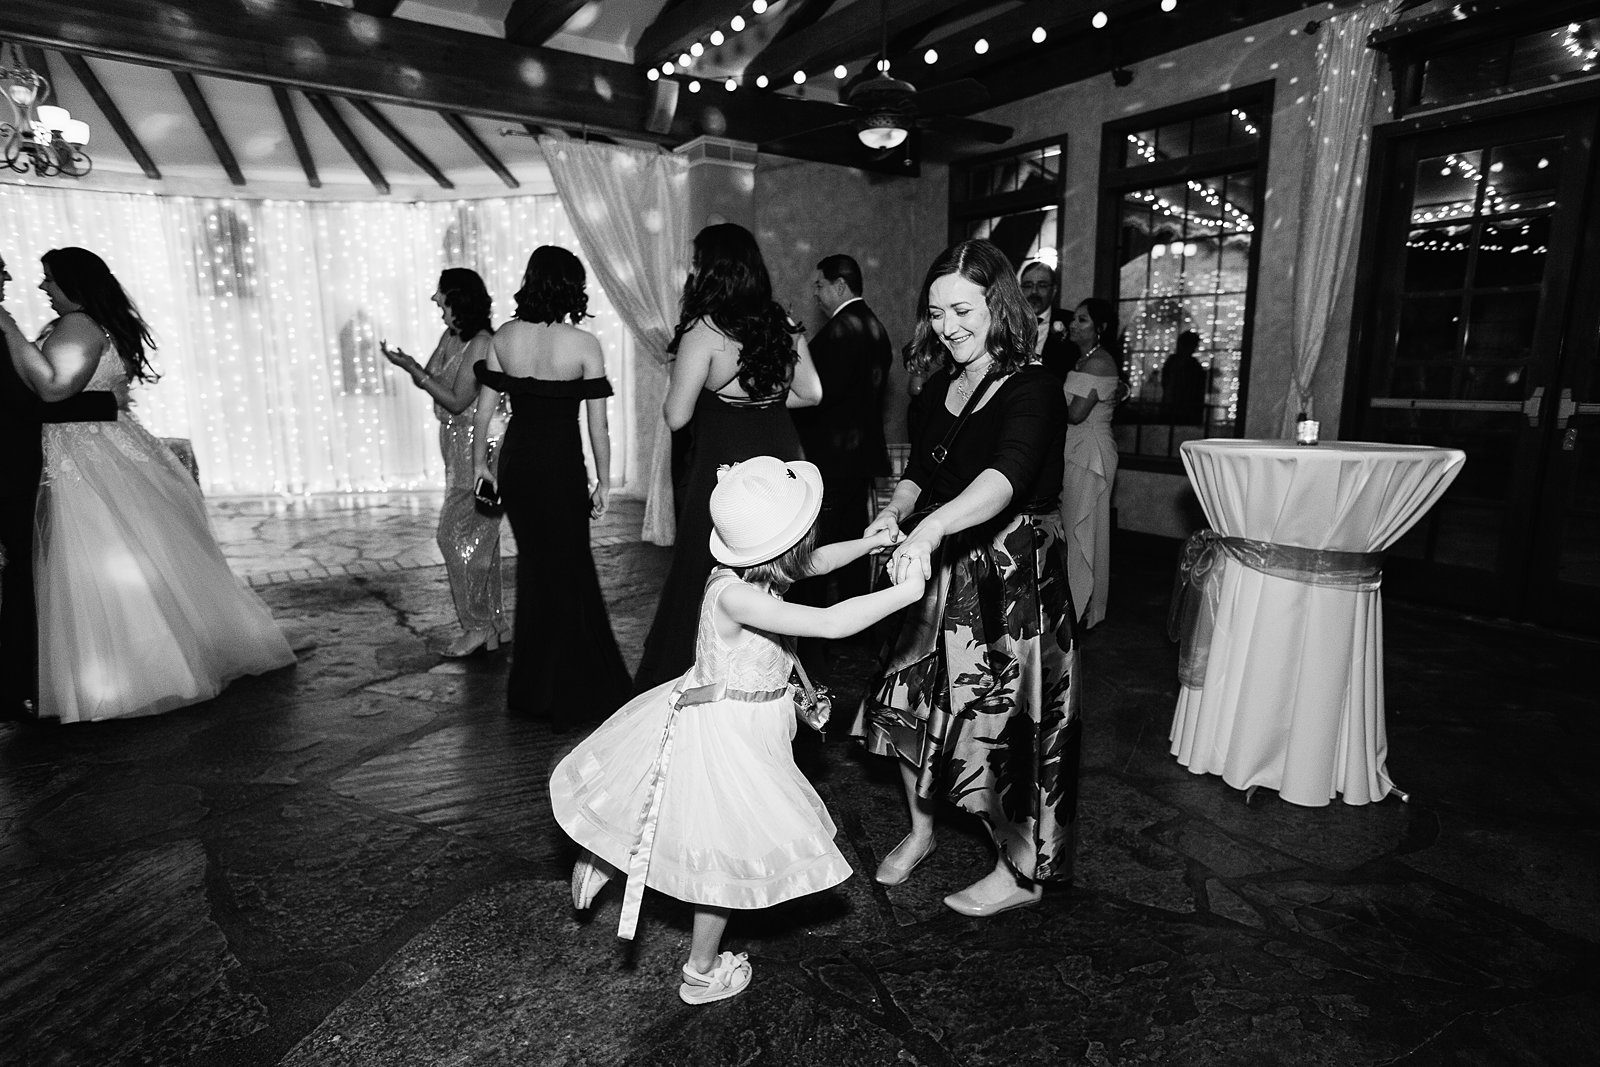 Guests dancing at a Wright House Provencal wedding reception by PMA Photography.